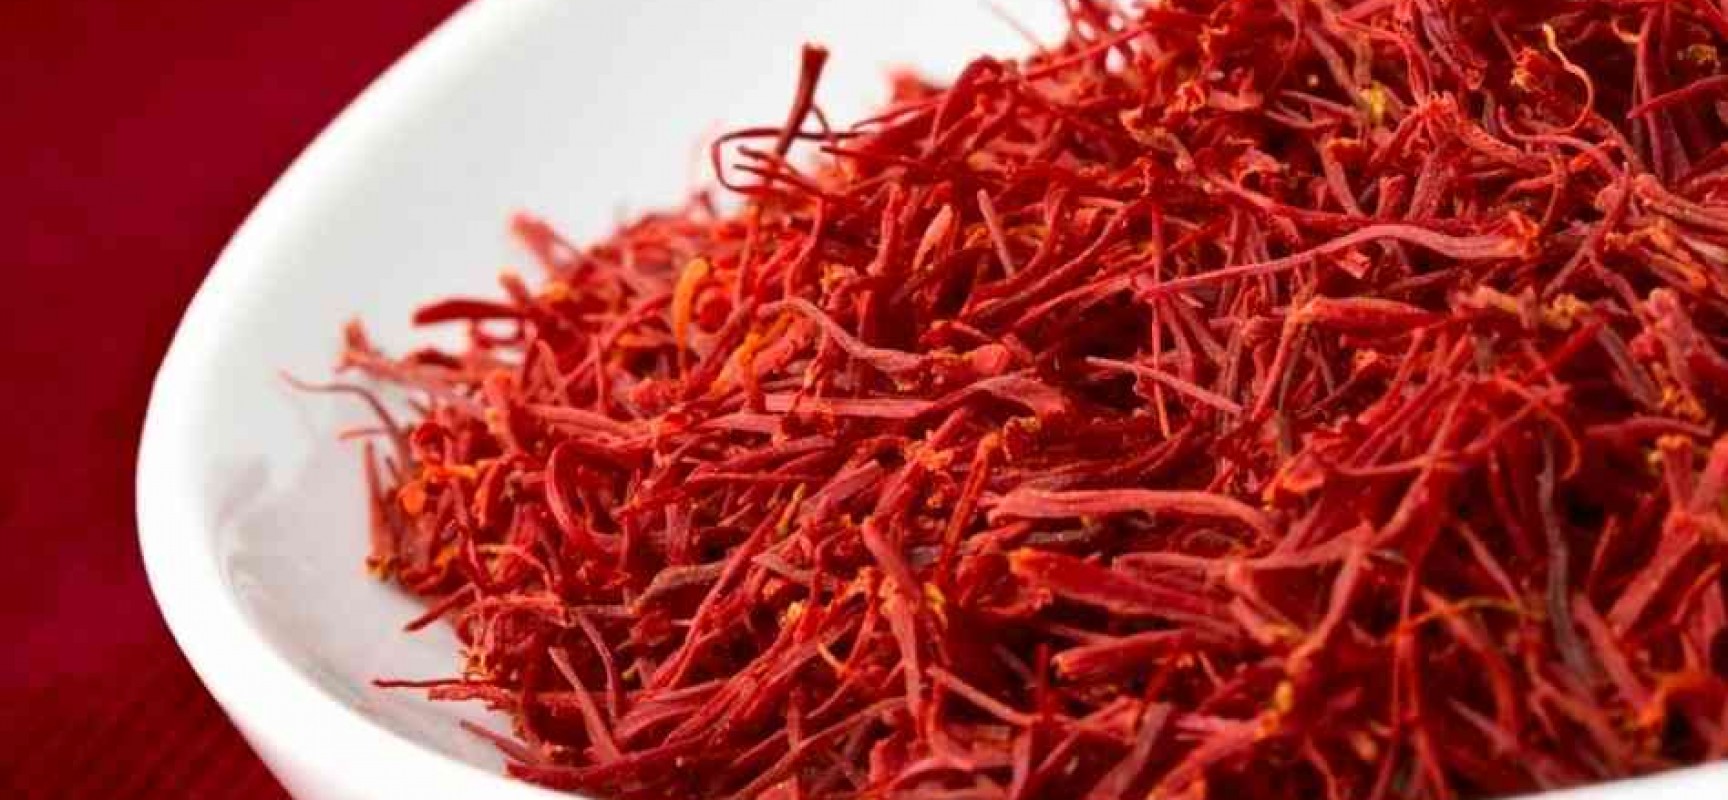 The crowning glory of the Ruby red- Saffron